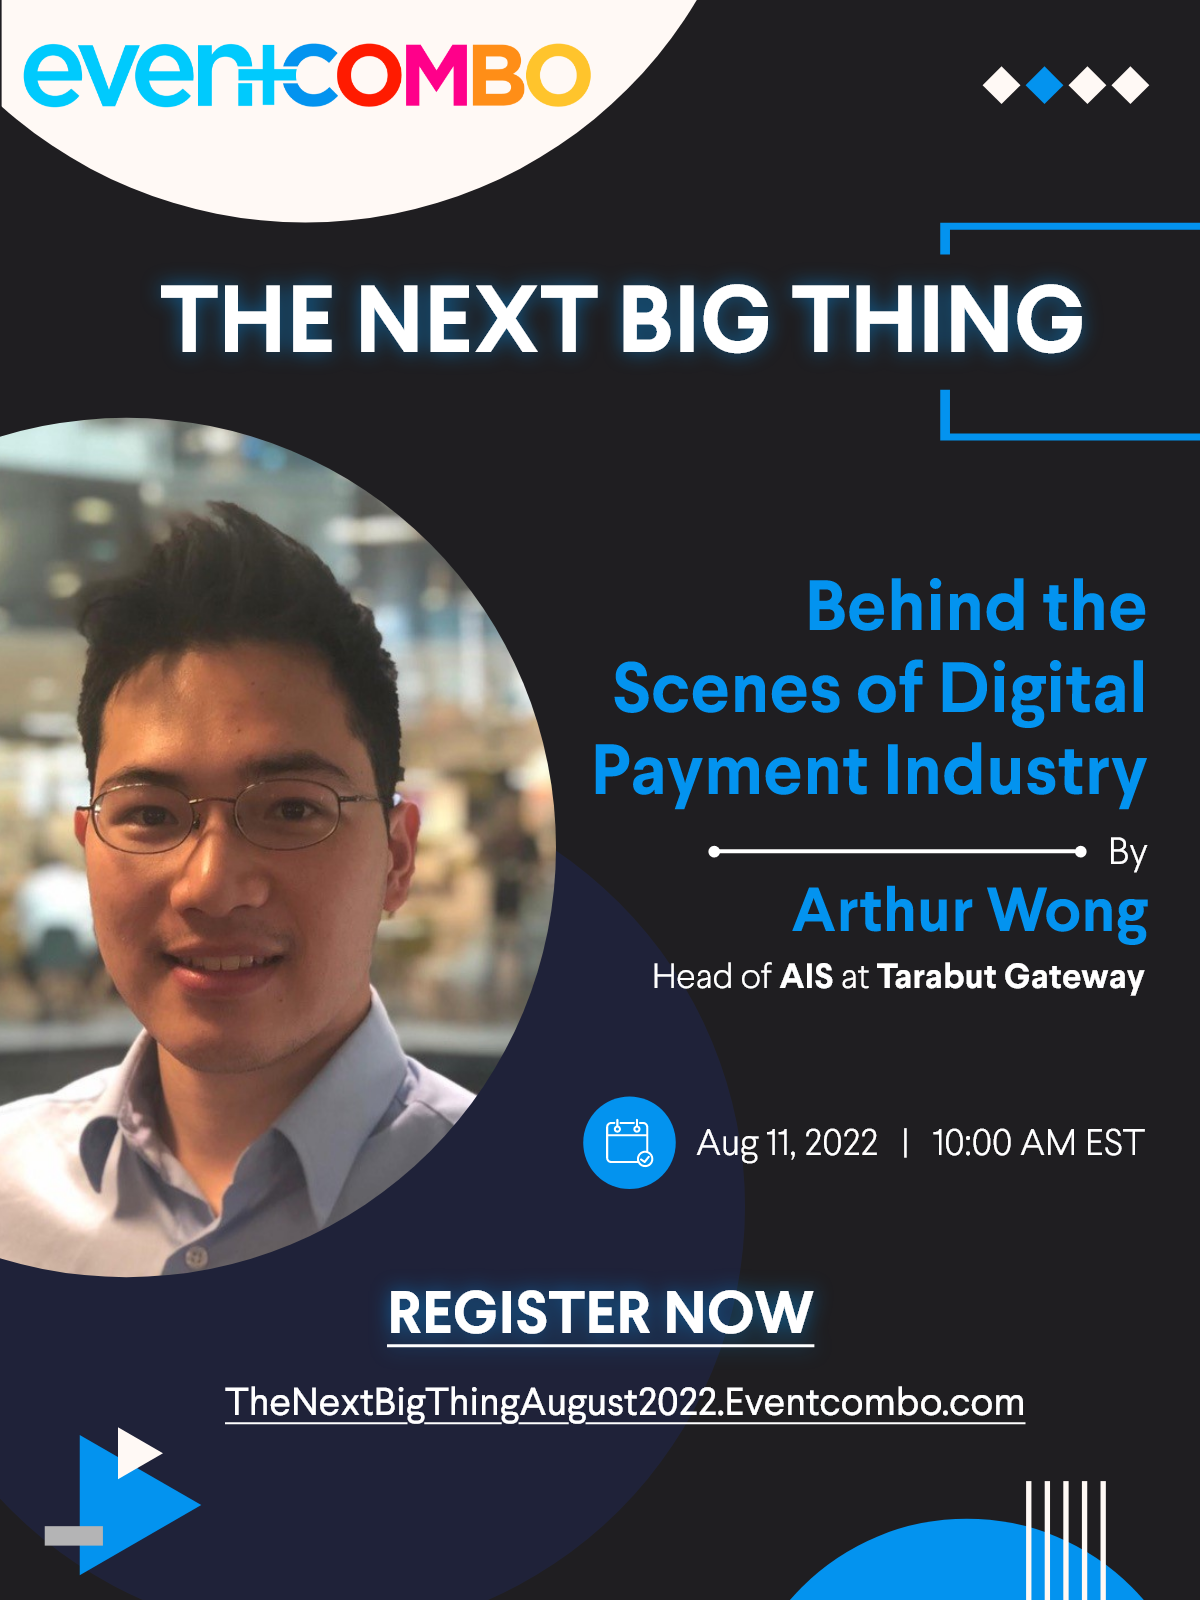 Behind the Scenes of Digital Payment Industry | The Next Big Thing | A Webinar Series by Eventcombo